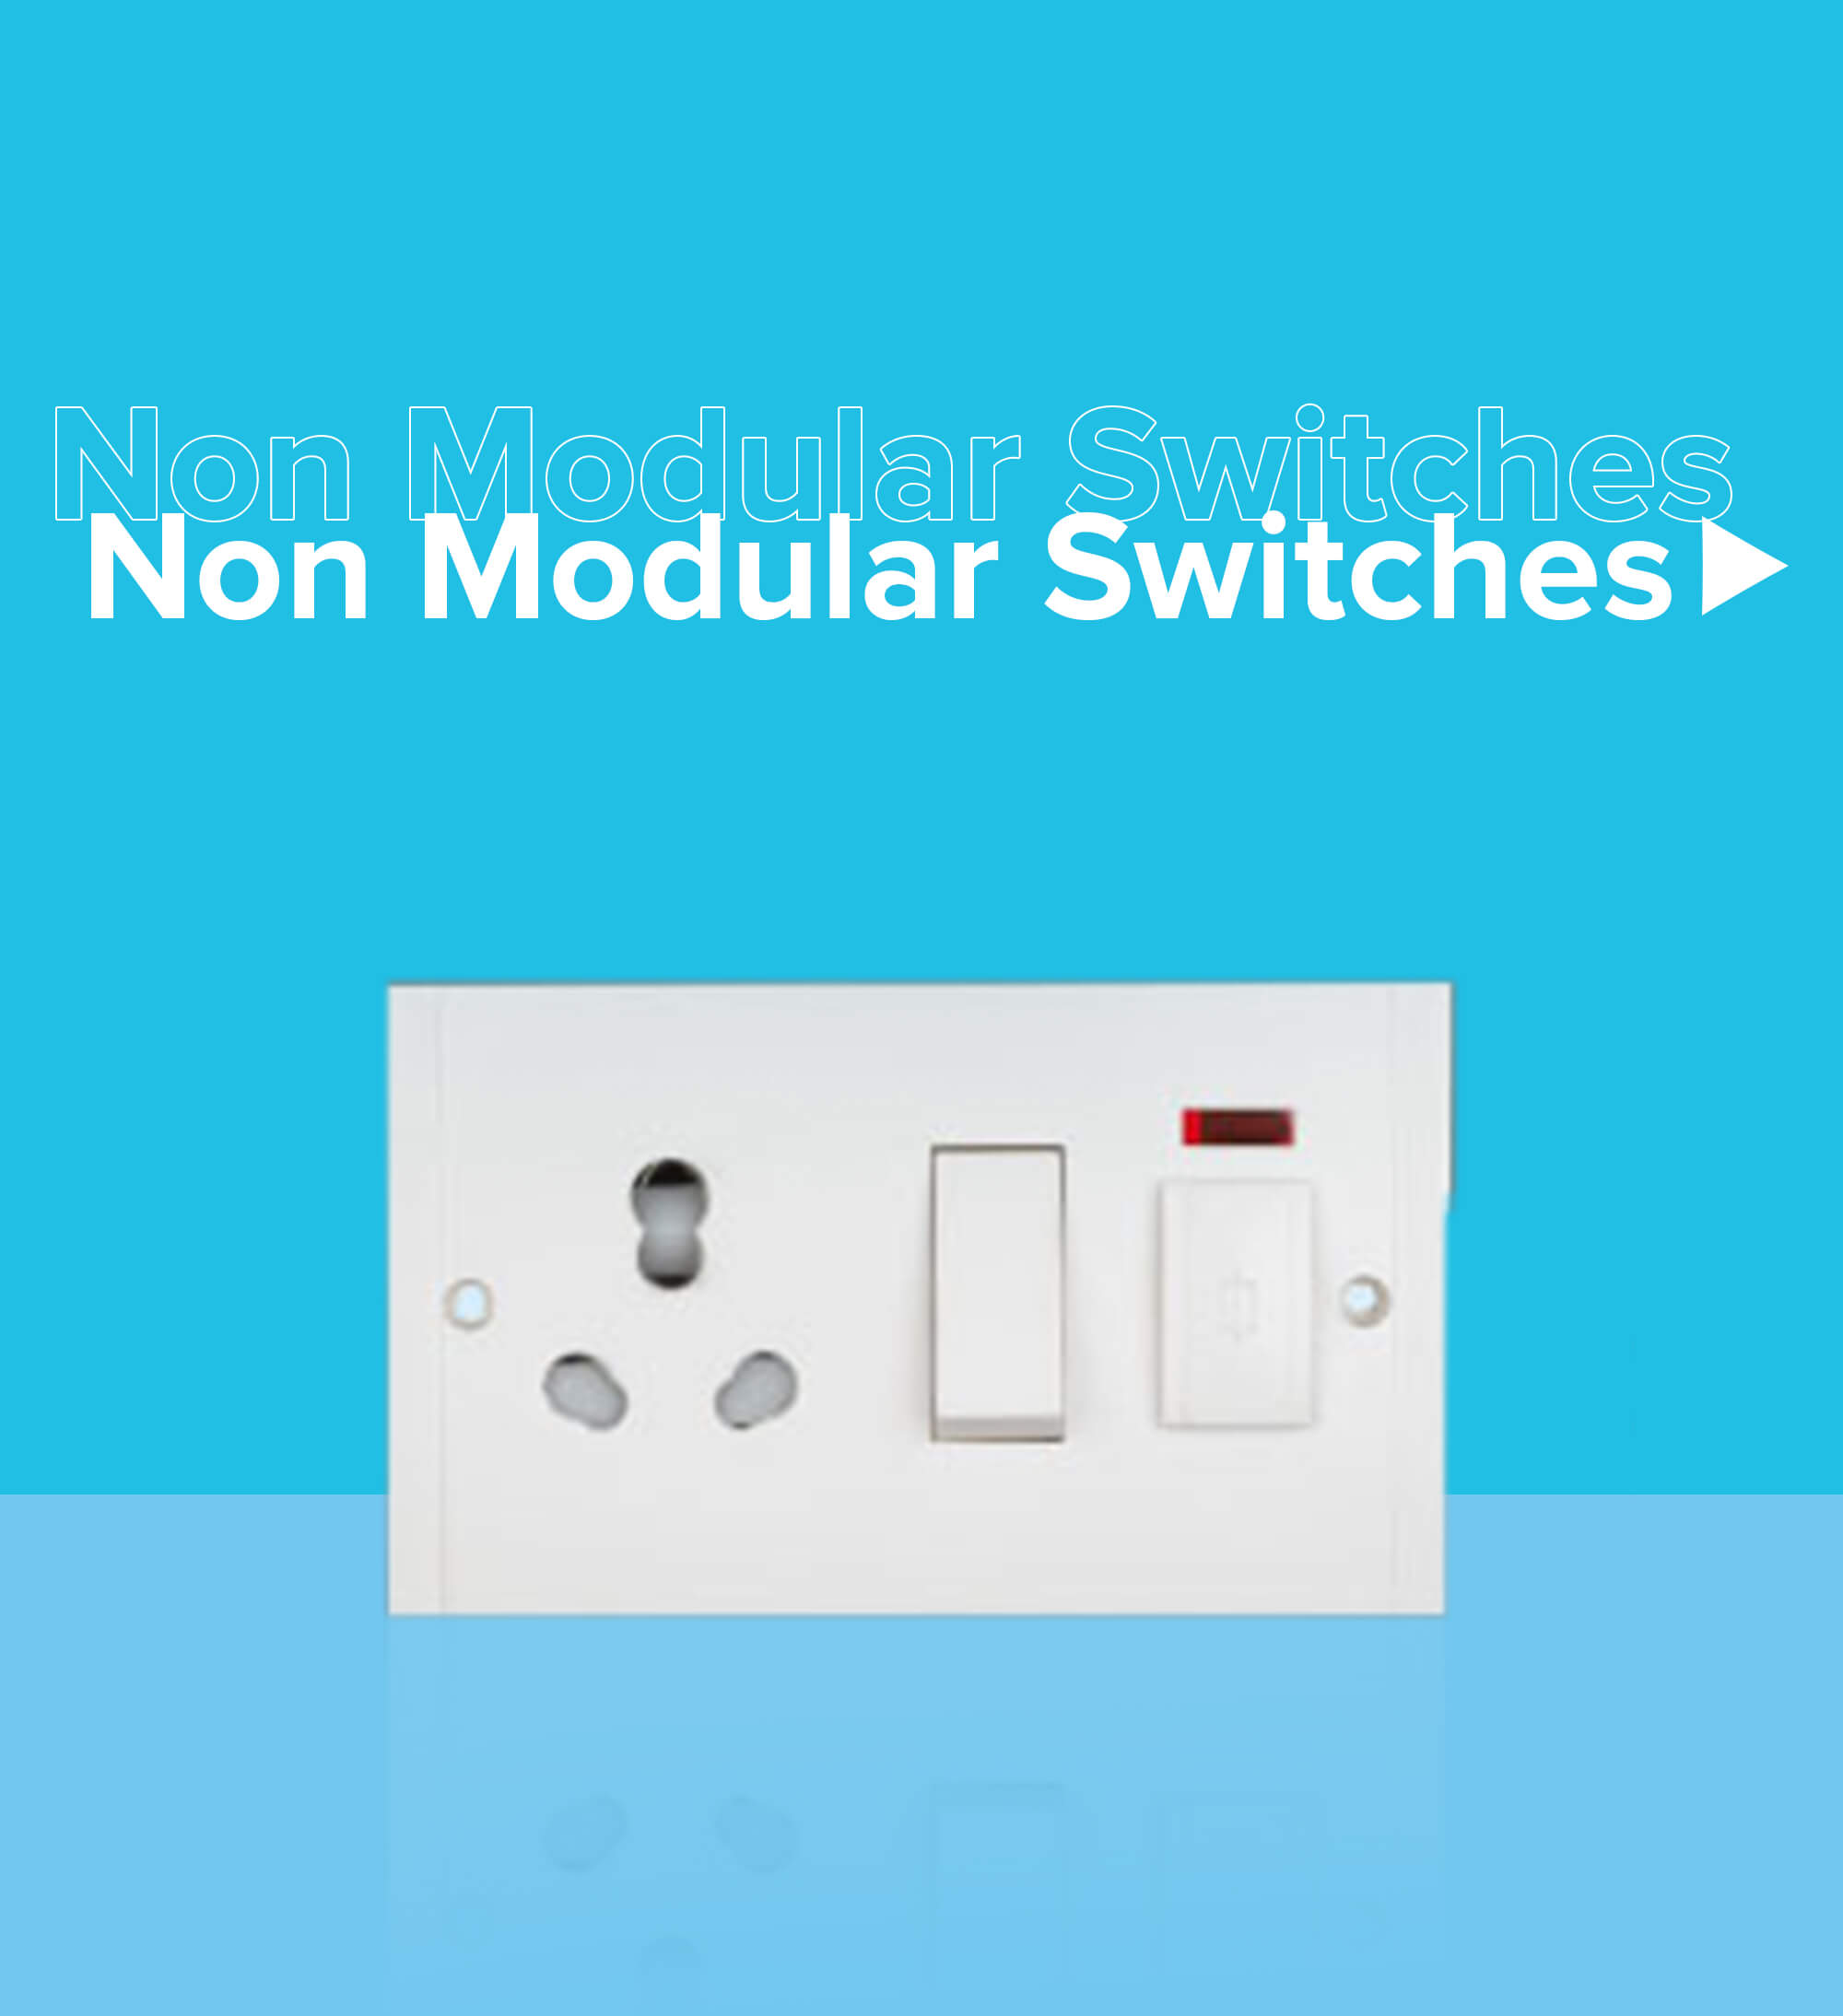 Series 5's Elegant Miniature Circuit Breaker and Modular Electrical Switches